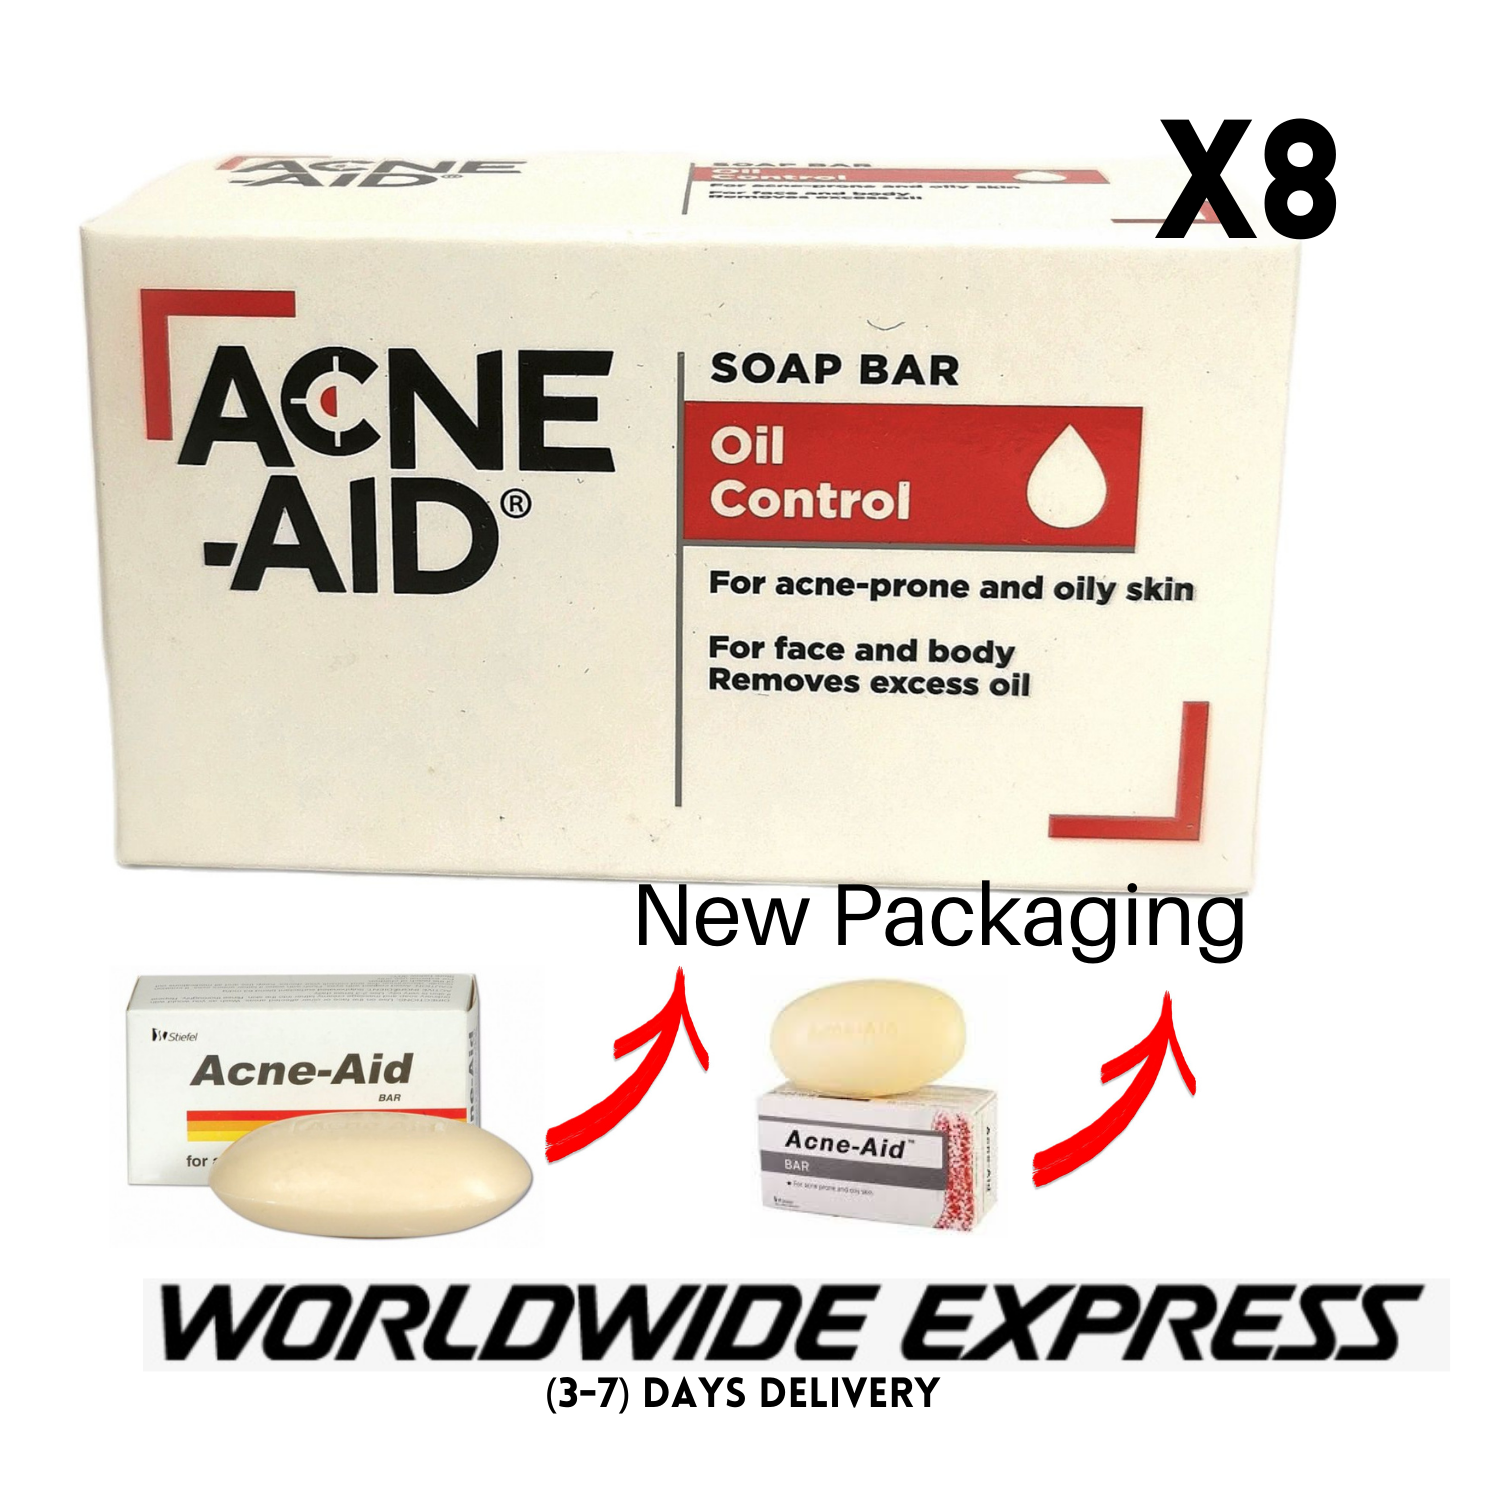 ACNE-AID Face and Body Soap Bar Oil Control 8x100g For Acne Prone and Oily Skin Acne-Aid